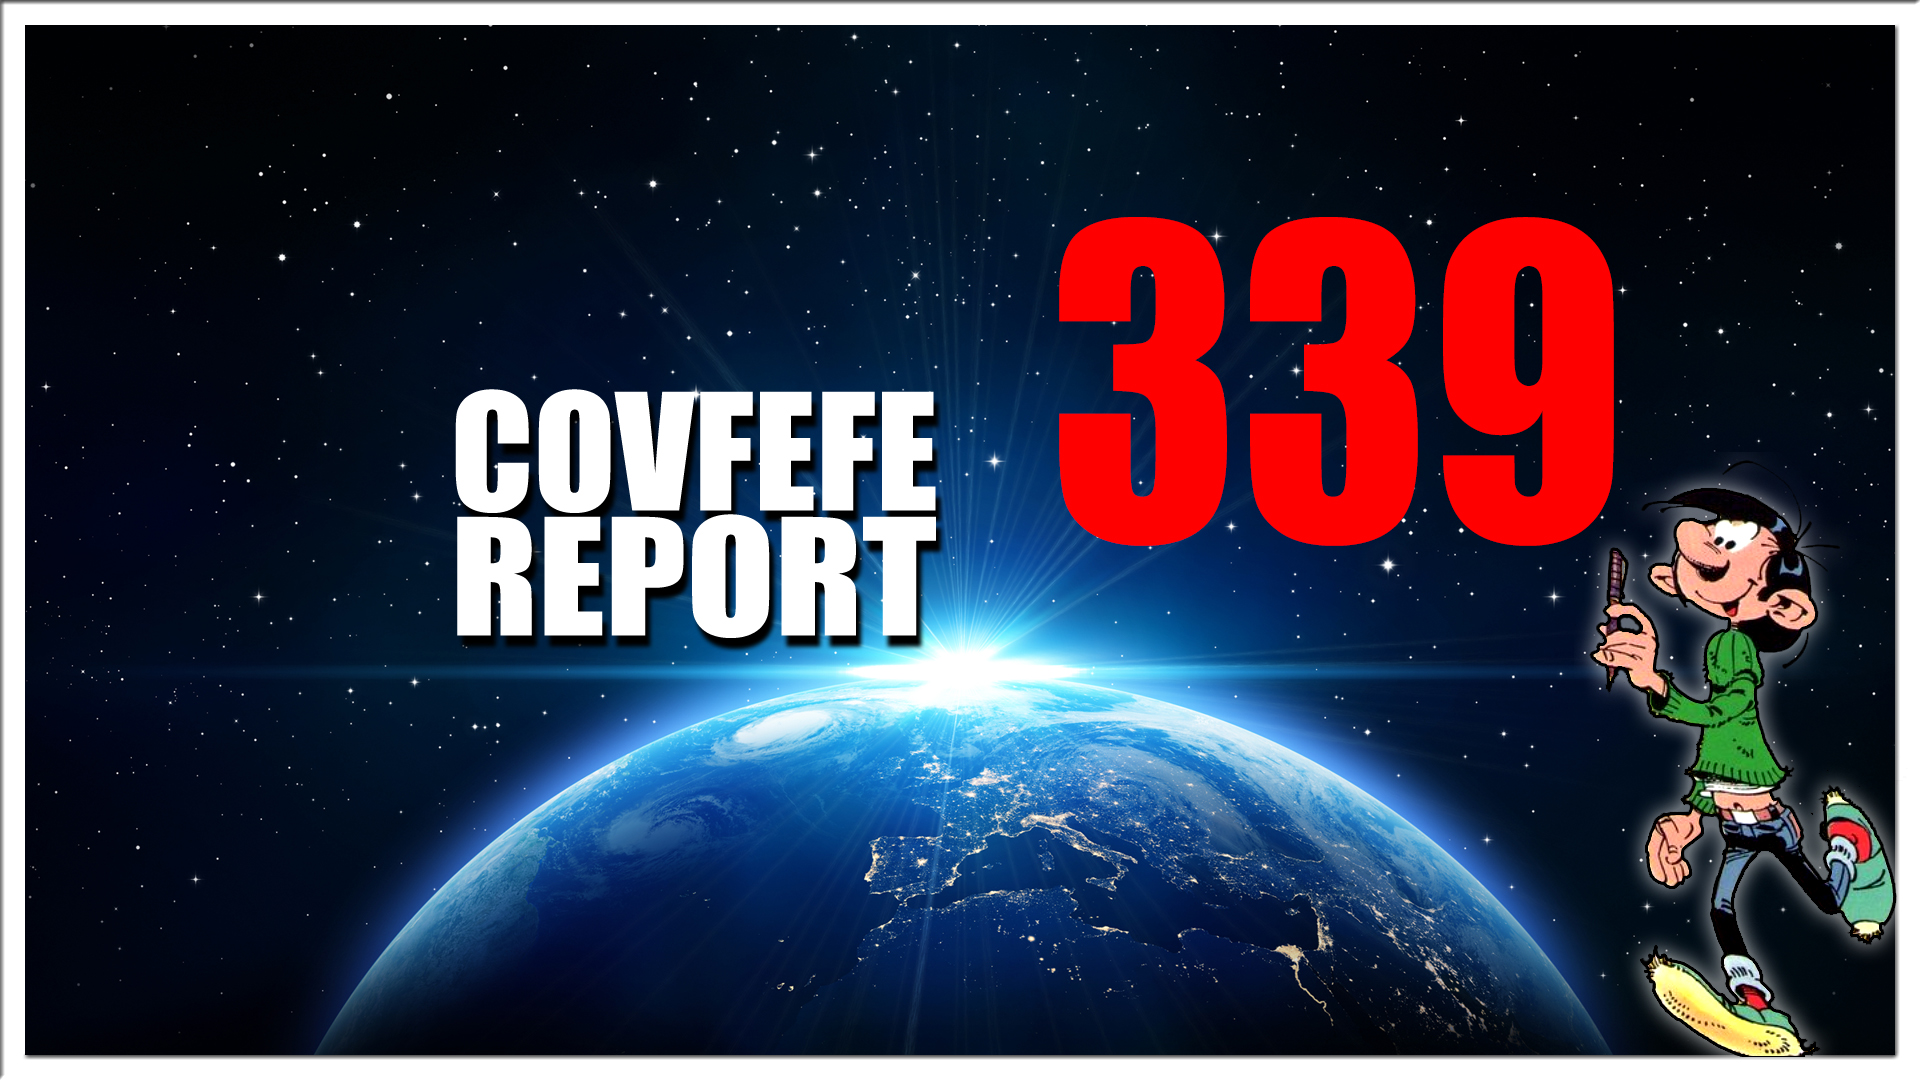 Covfefe Report 339. These boots are made for walking, wrwy.nl, Moord via overheid